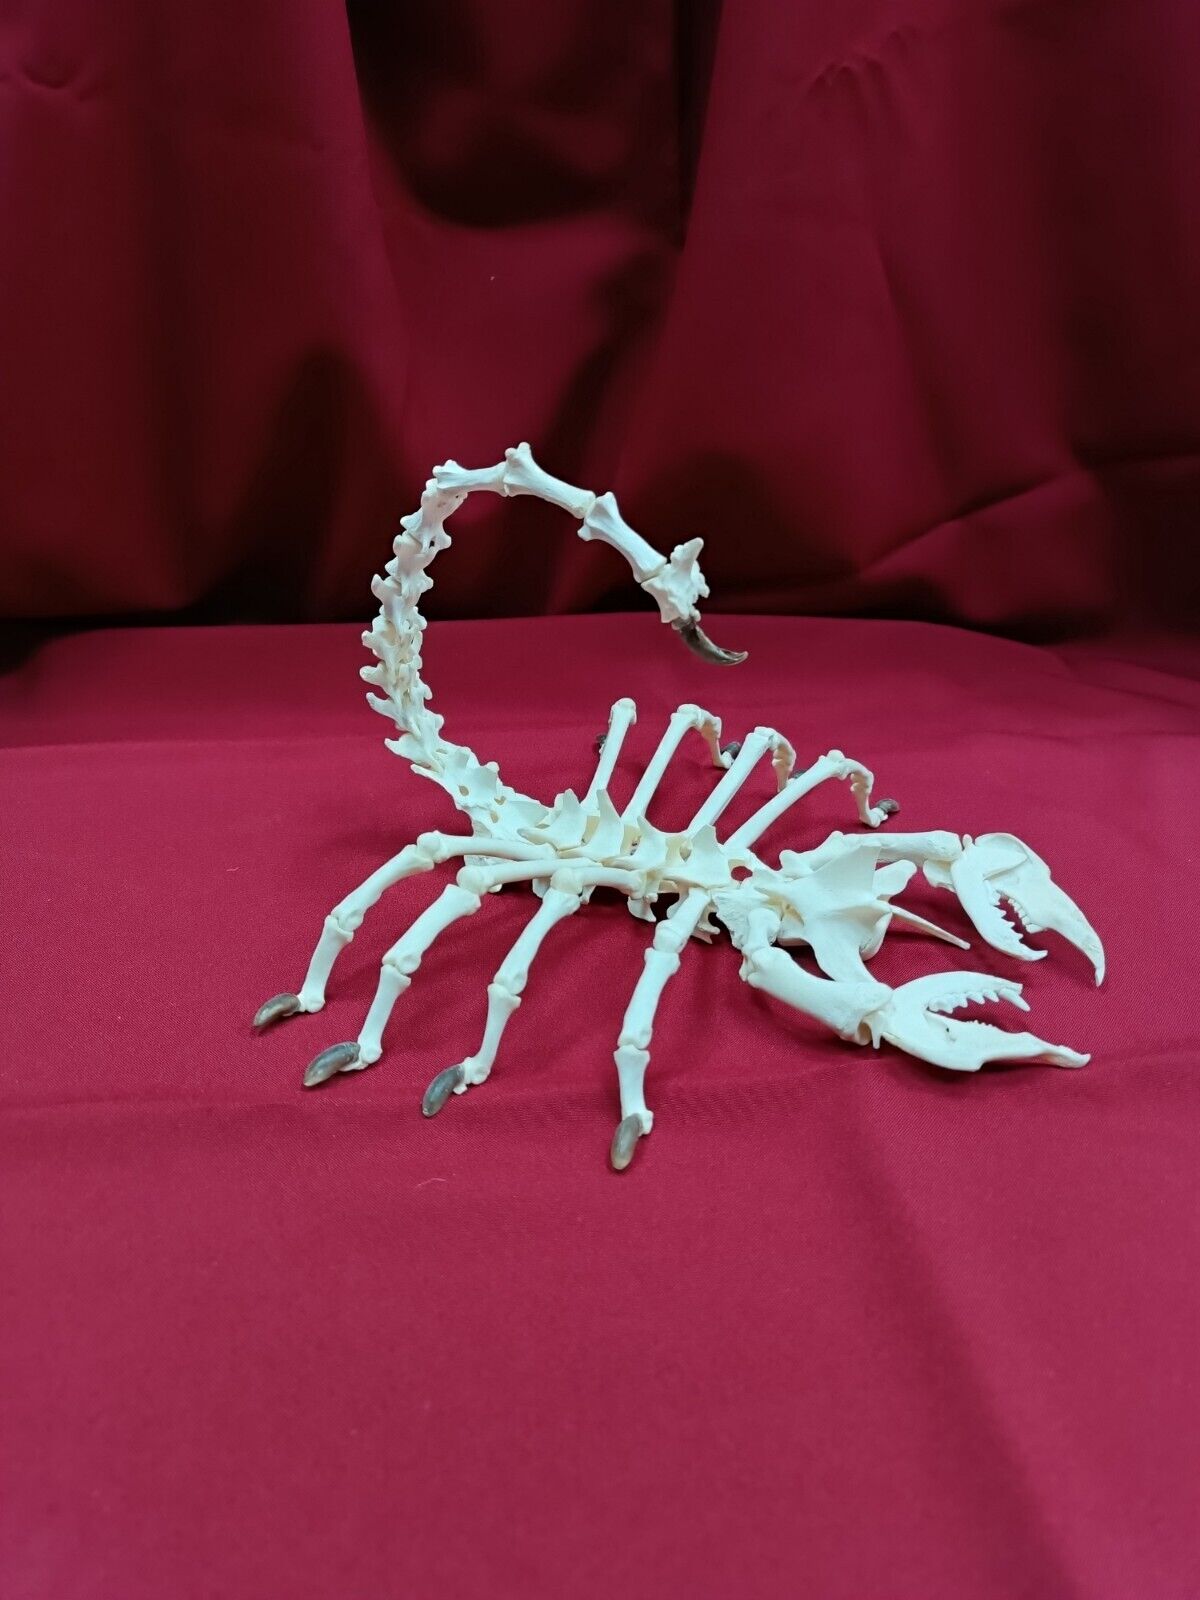 Large scorpion made of bones. Skeleton of a giant scorpion. Osteology taxidermy.